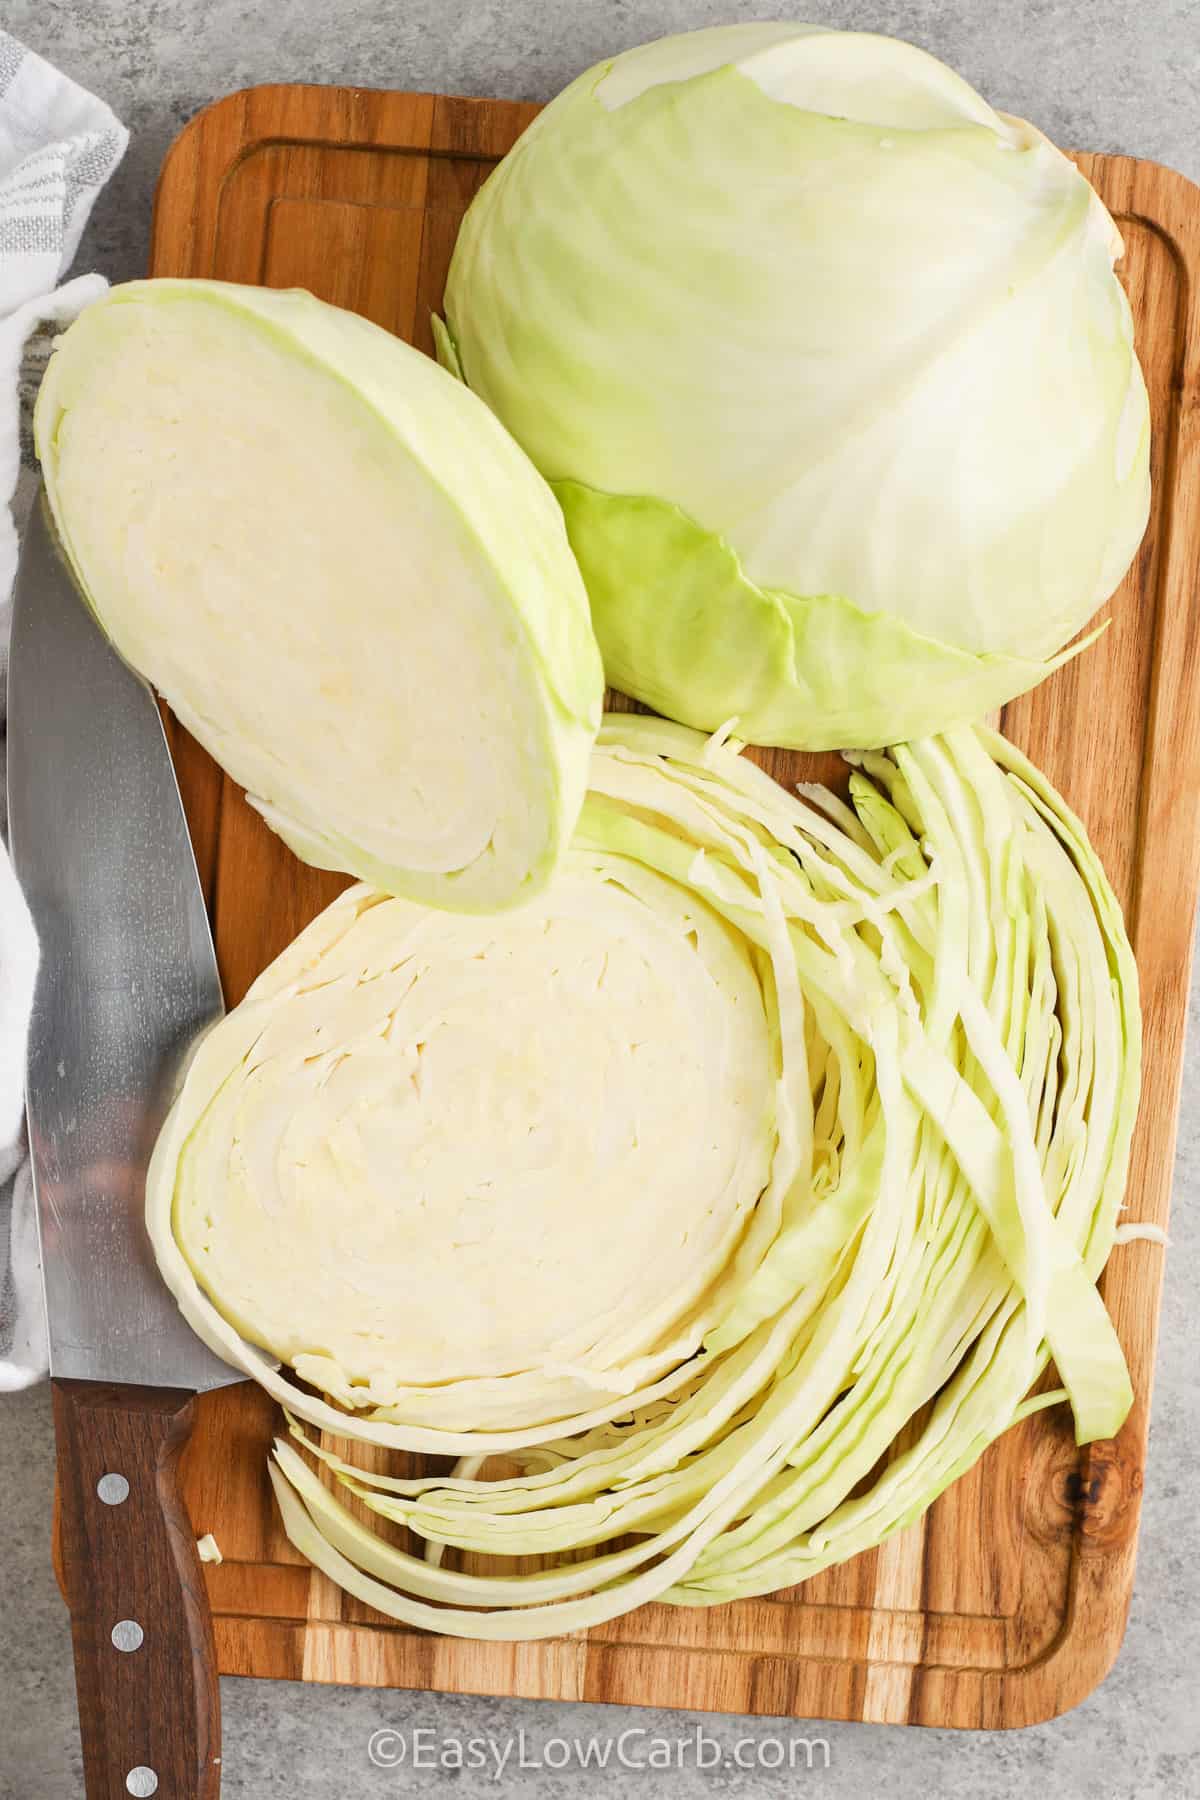 cabbage being cut on a wooden board with a knife